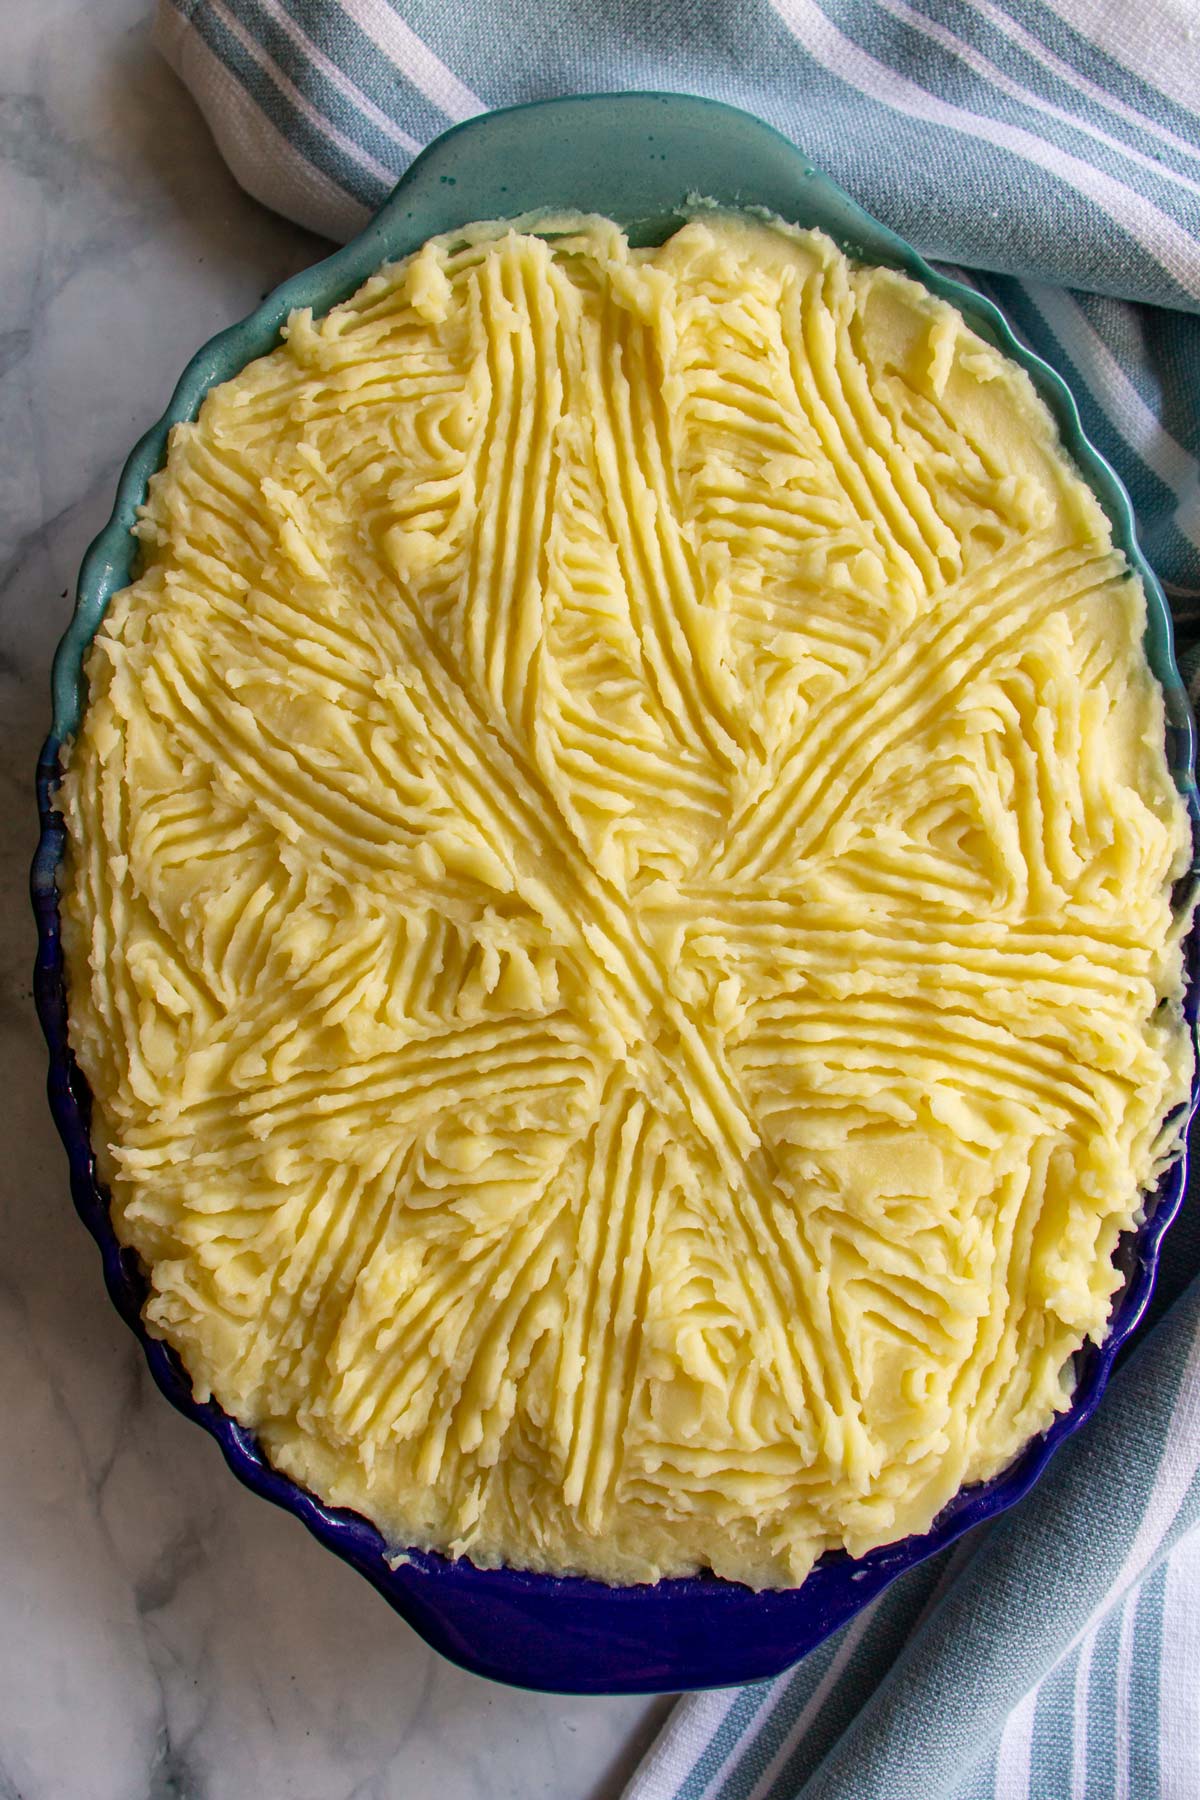 An unbaked mashed potato topped pie in a blue oval baking dish.